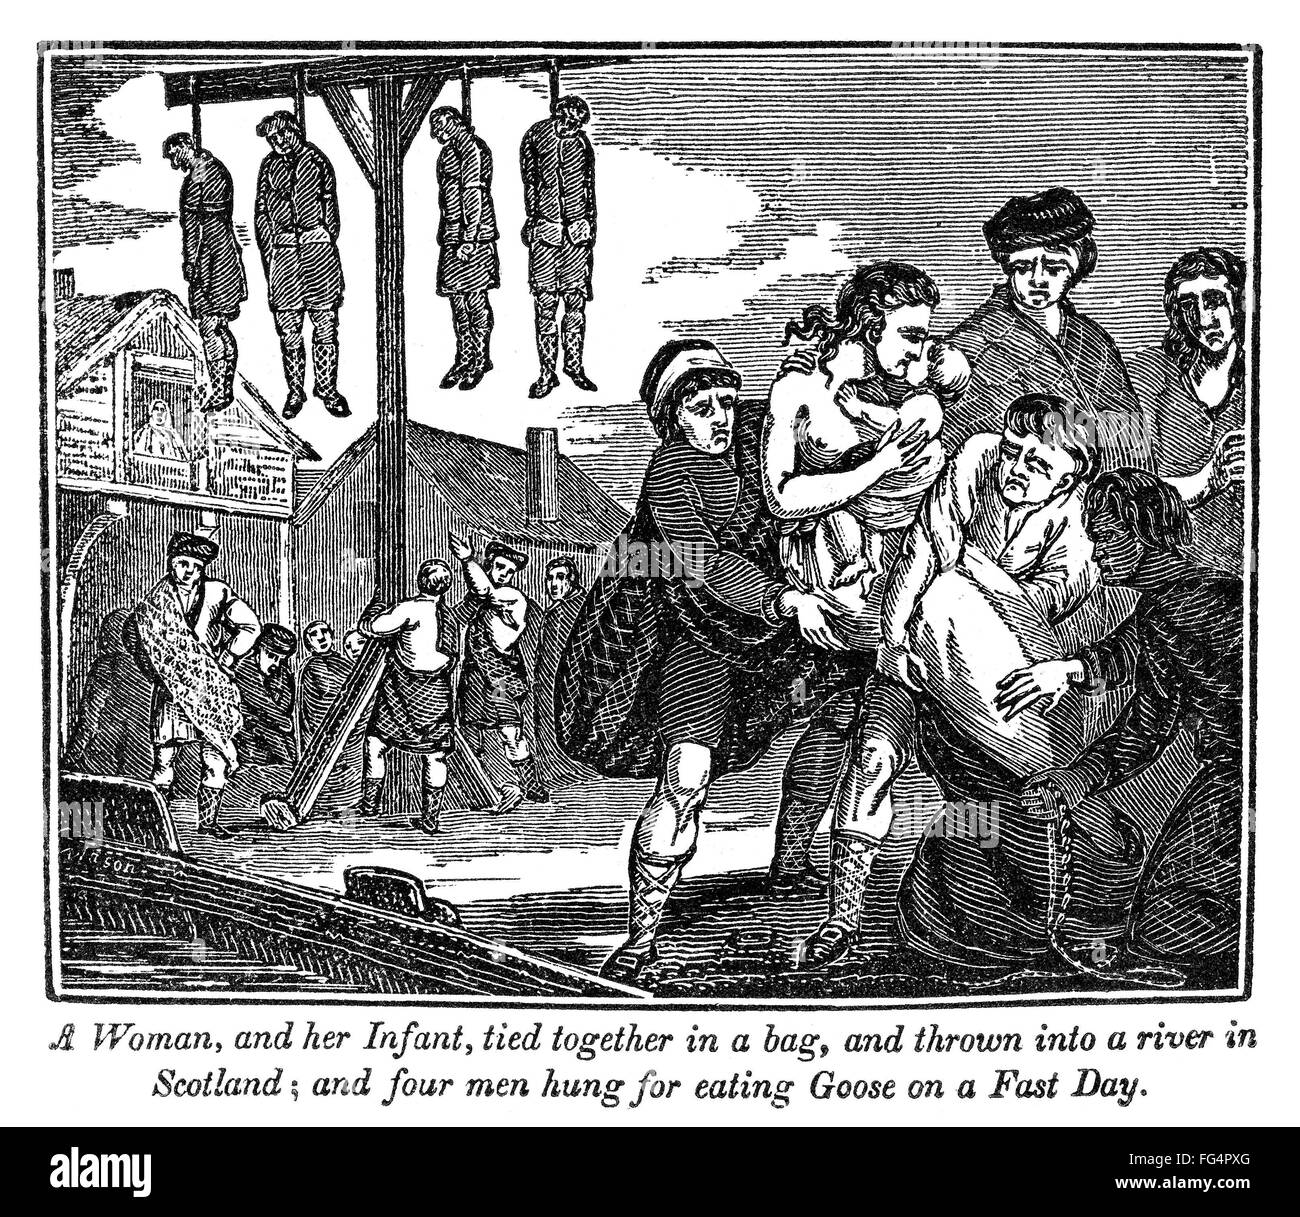 SCOTLAND: PERSECUTION, 1543. /nA woman and her infant drowned in a river, and four men hung for eating a goose on All Hallow's Eve, a fast day in Scotland, 1543. Wood engraving from the 'Book of Martyrs,' by John Foxe, 1840. Stock Photo